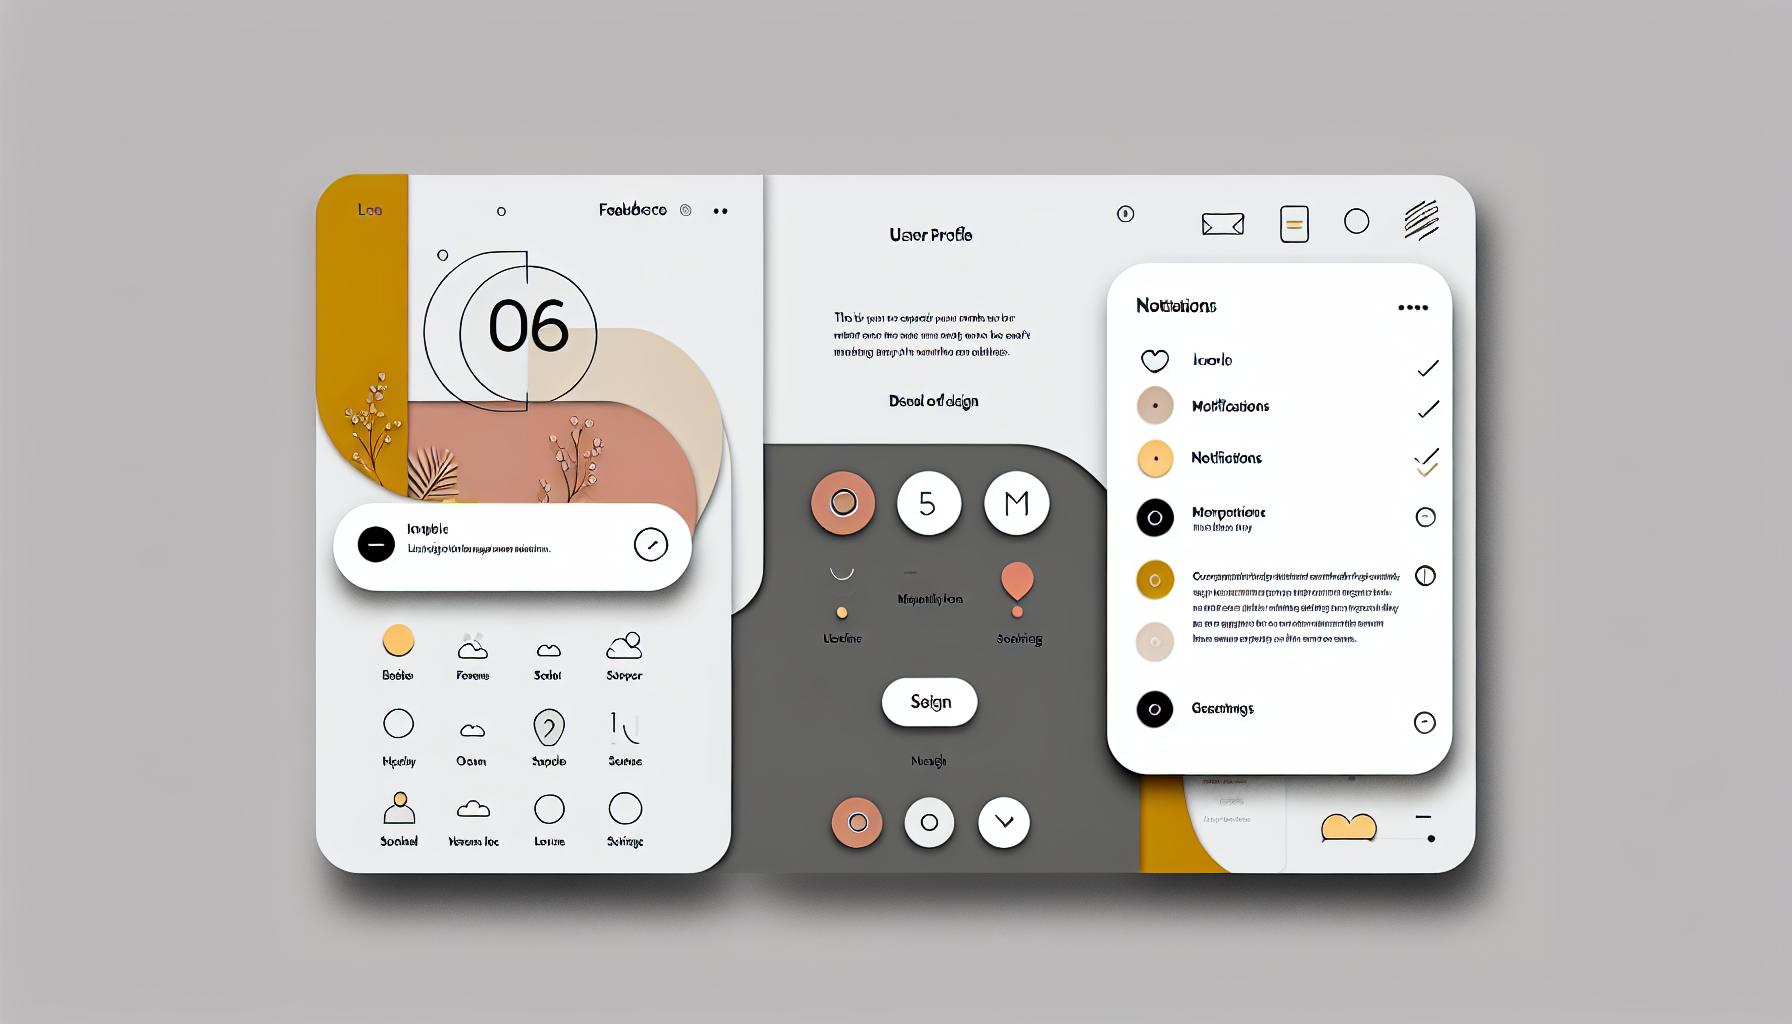 A minimalist yet feature-rich app interface designed by Bee Techy